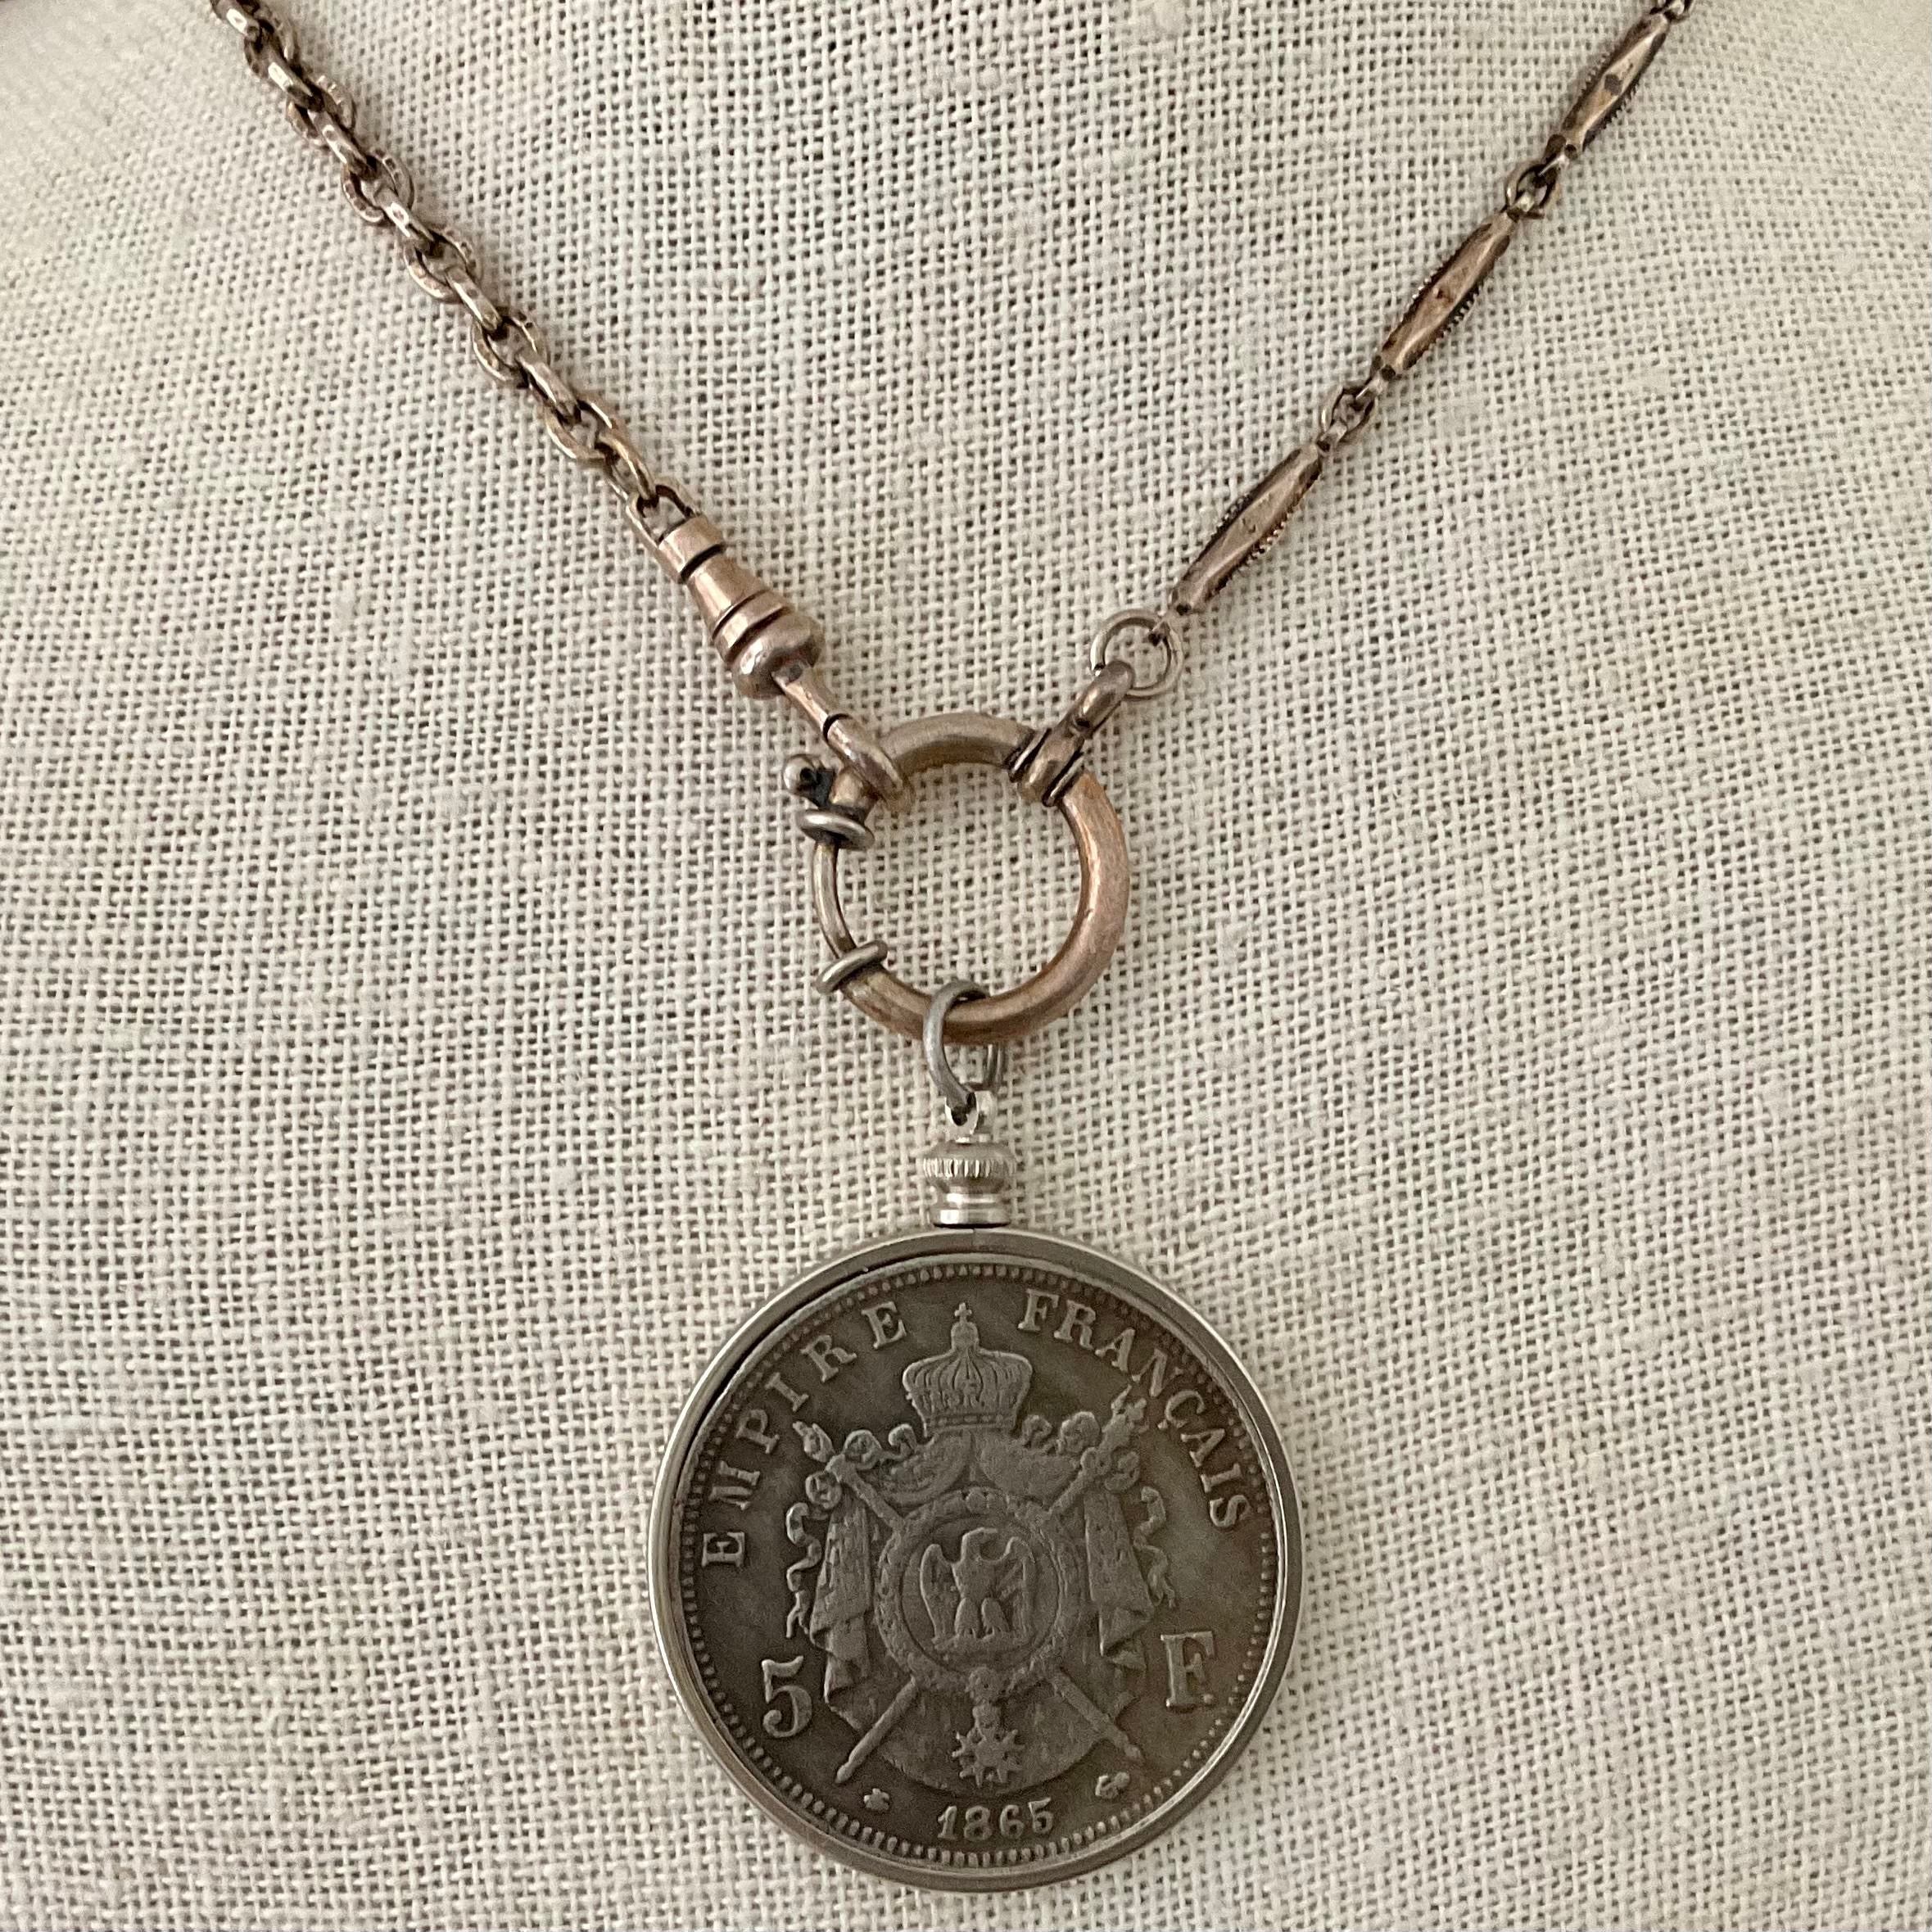 Vintage Sterling Plated Chain with French Coin Circa 1865